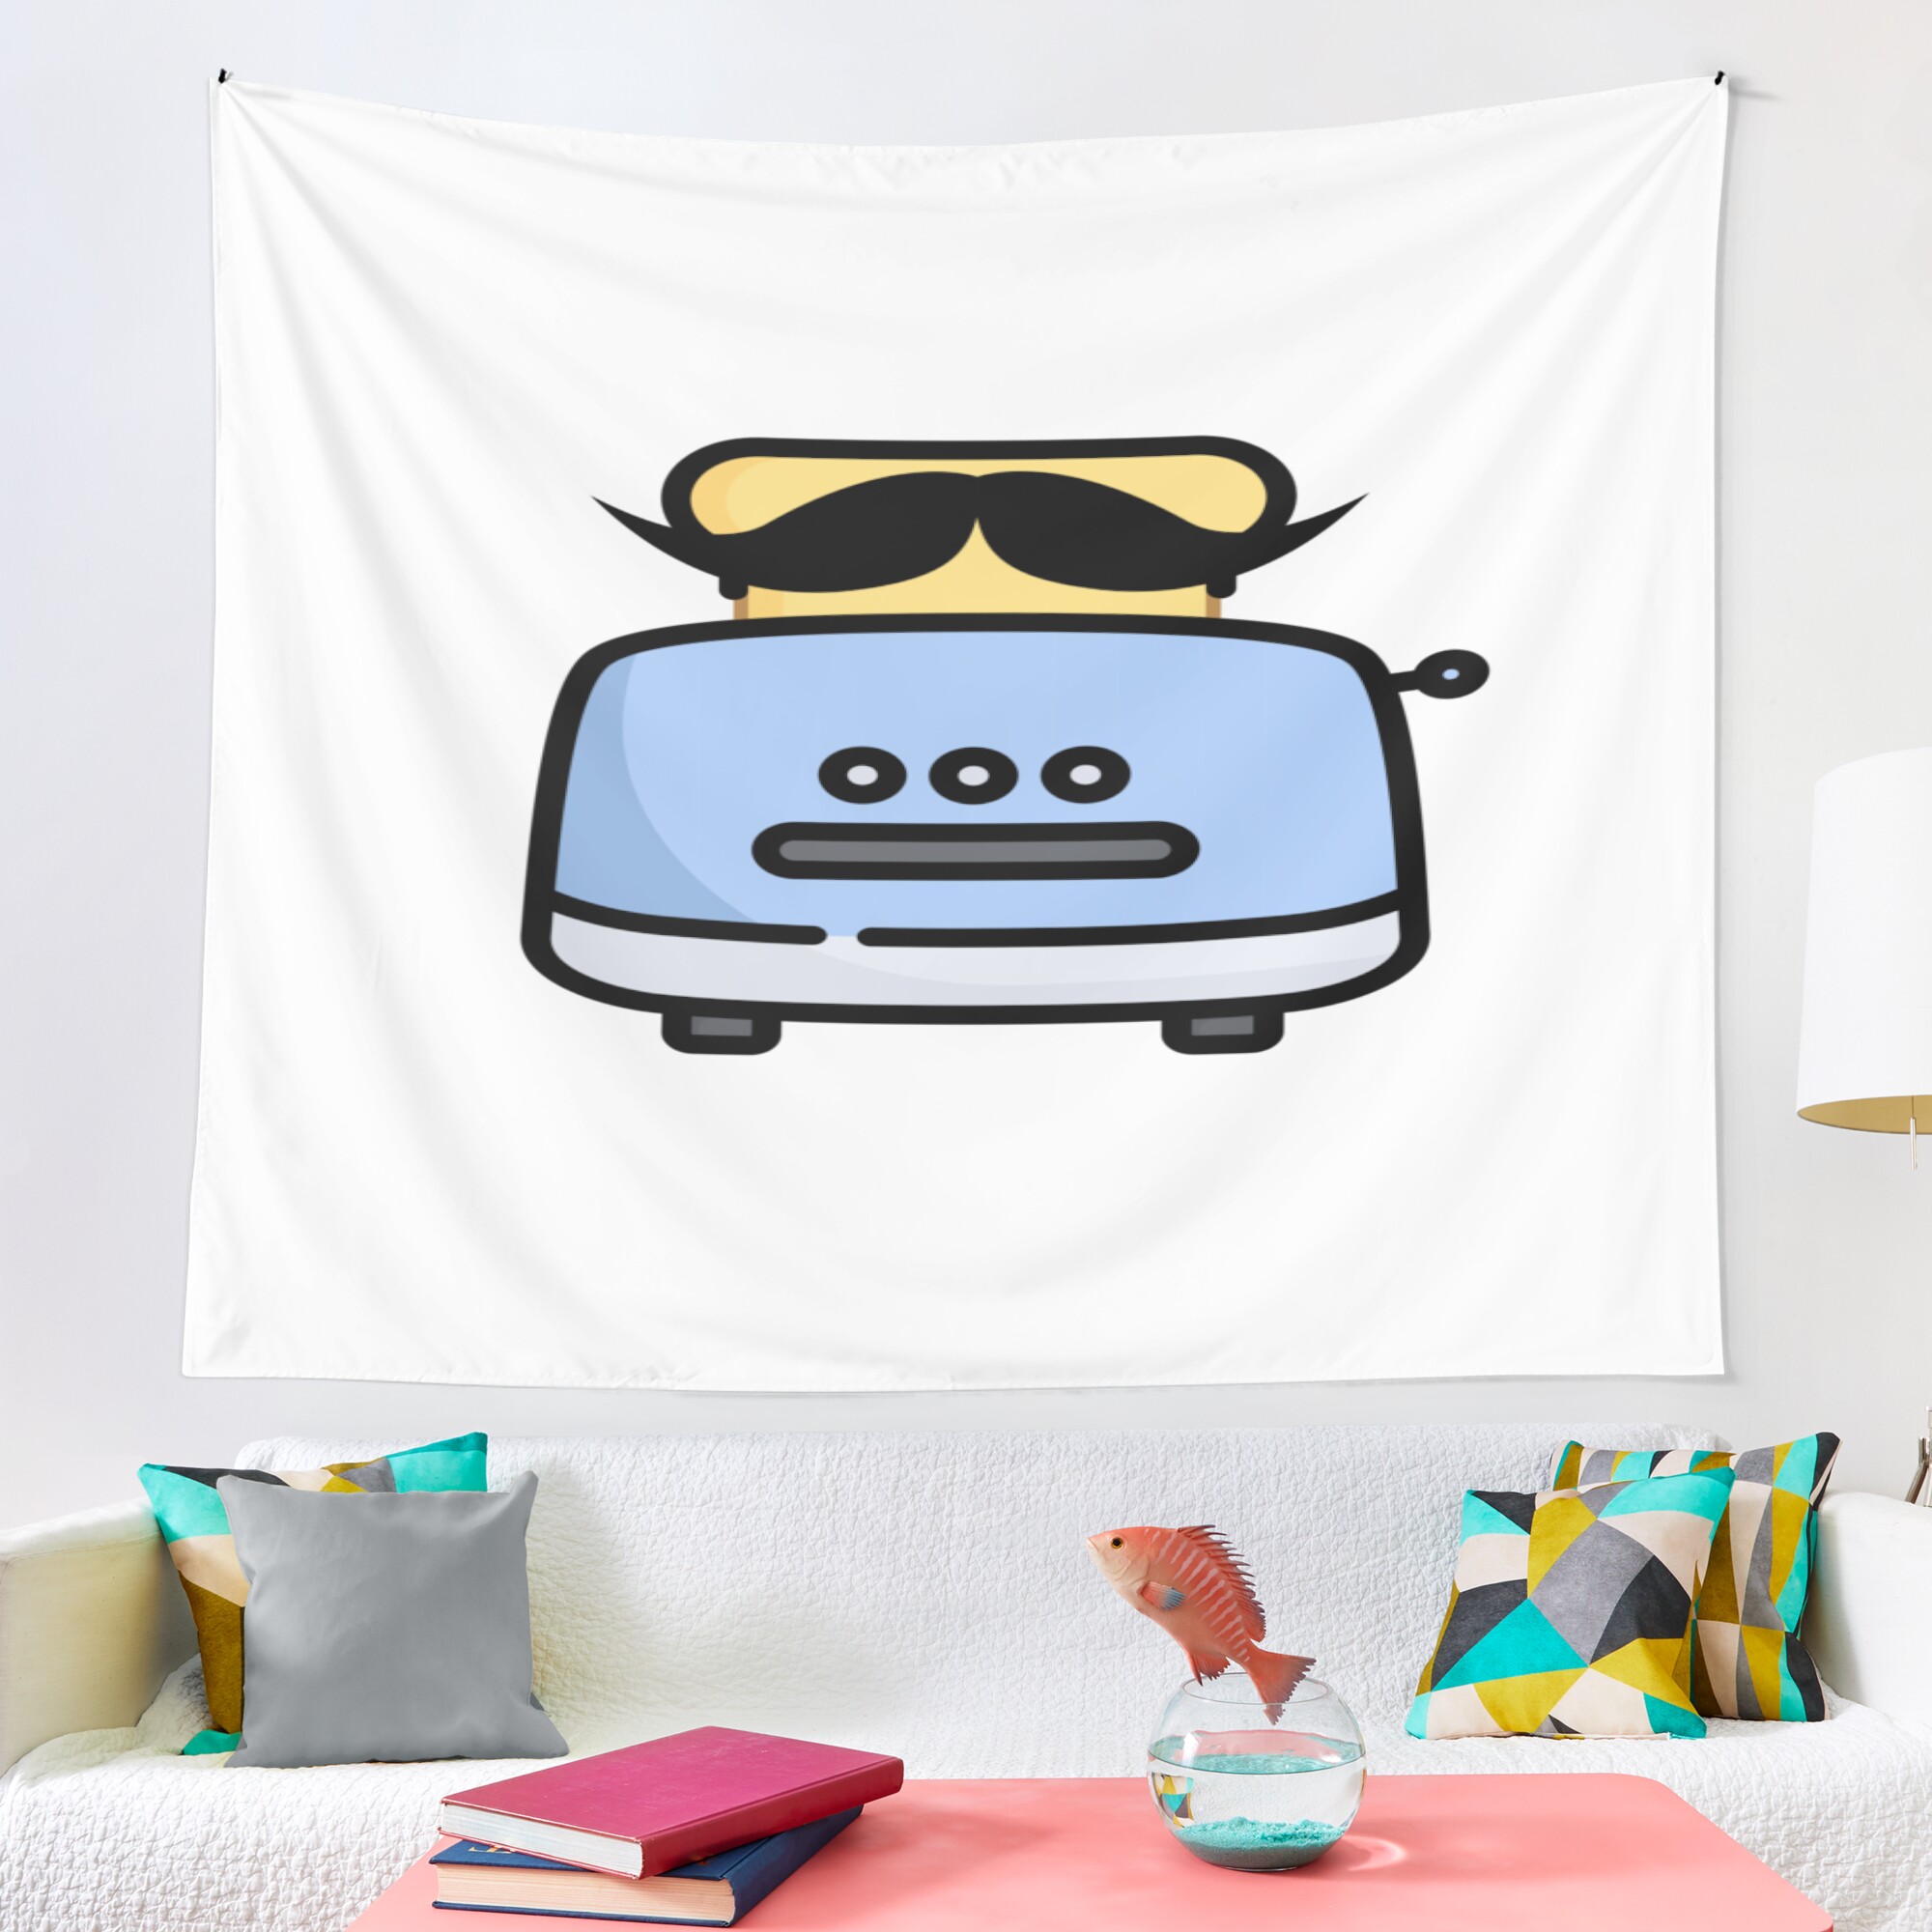 urtapestry lifestyle largesquare2000x2000 7 - Disguised Toast Shop